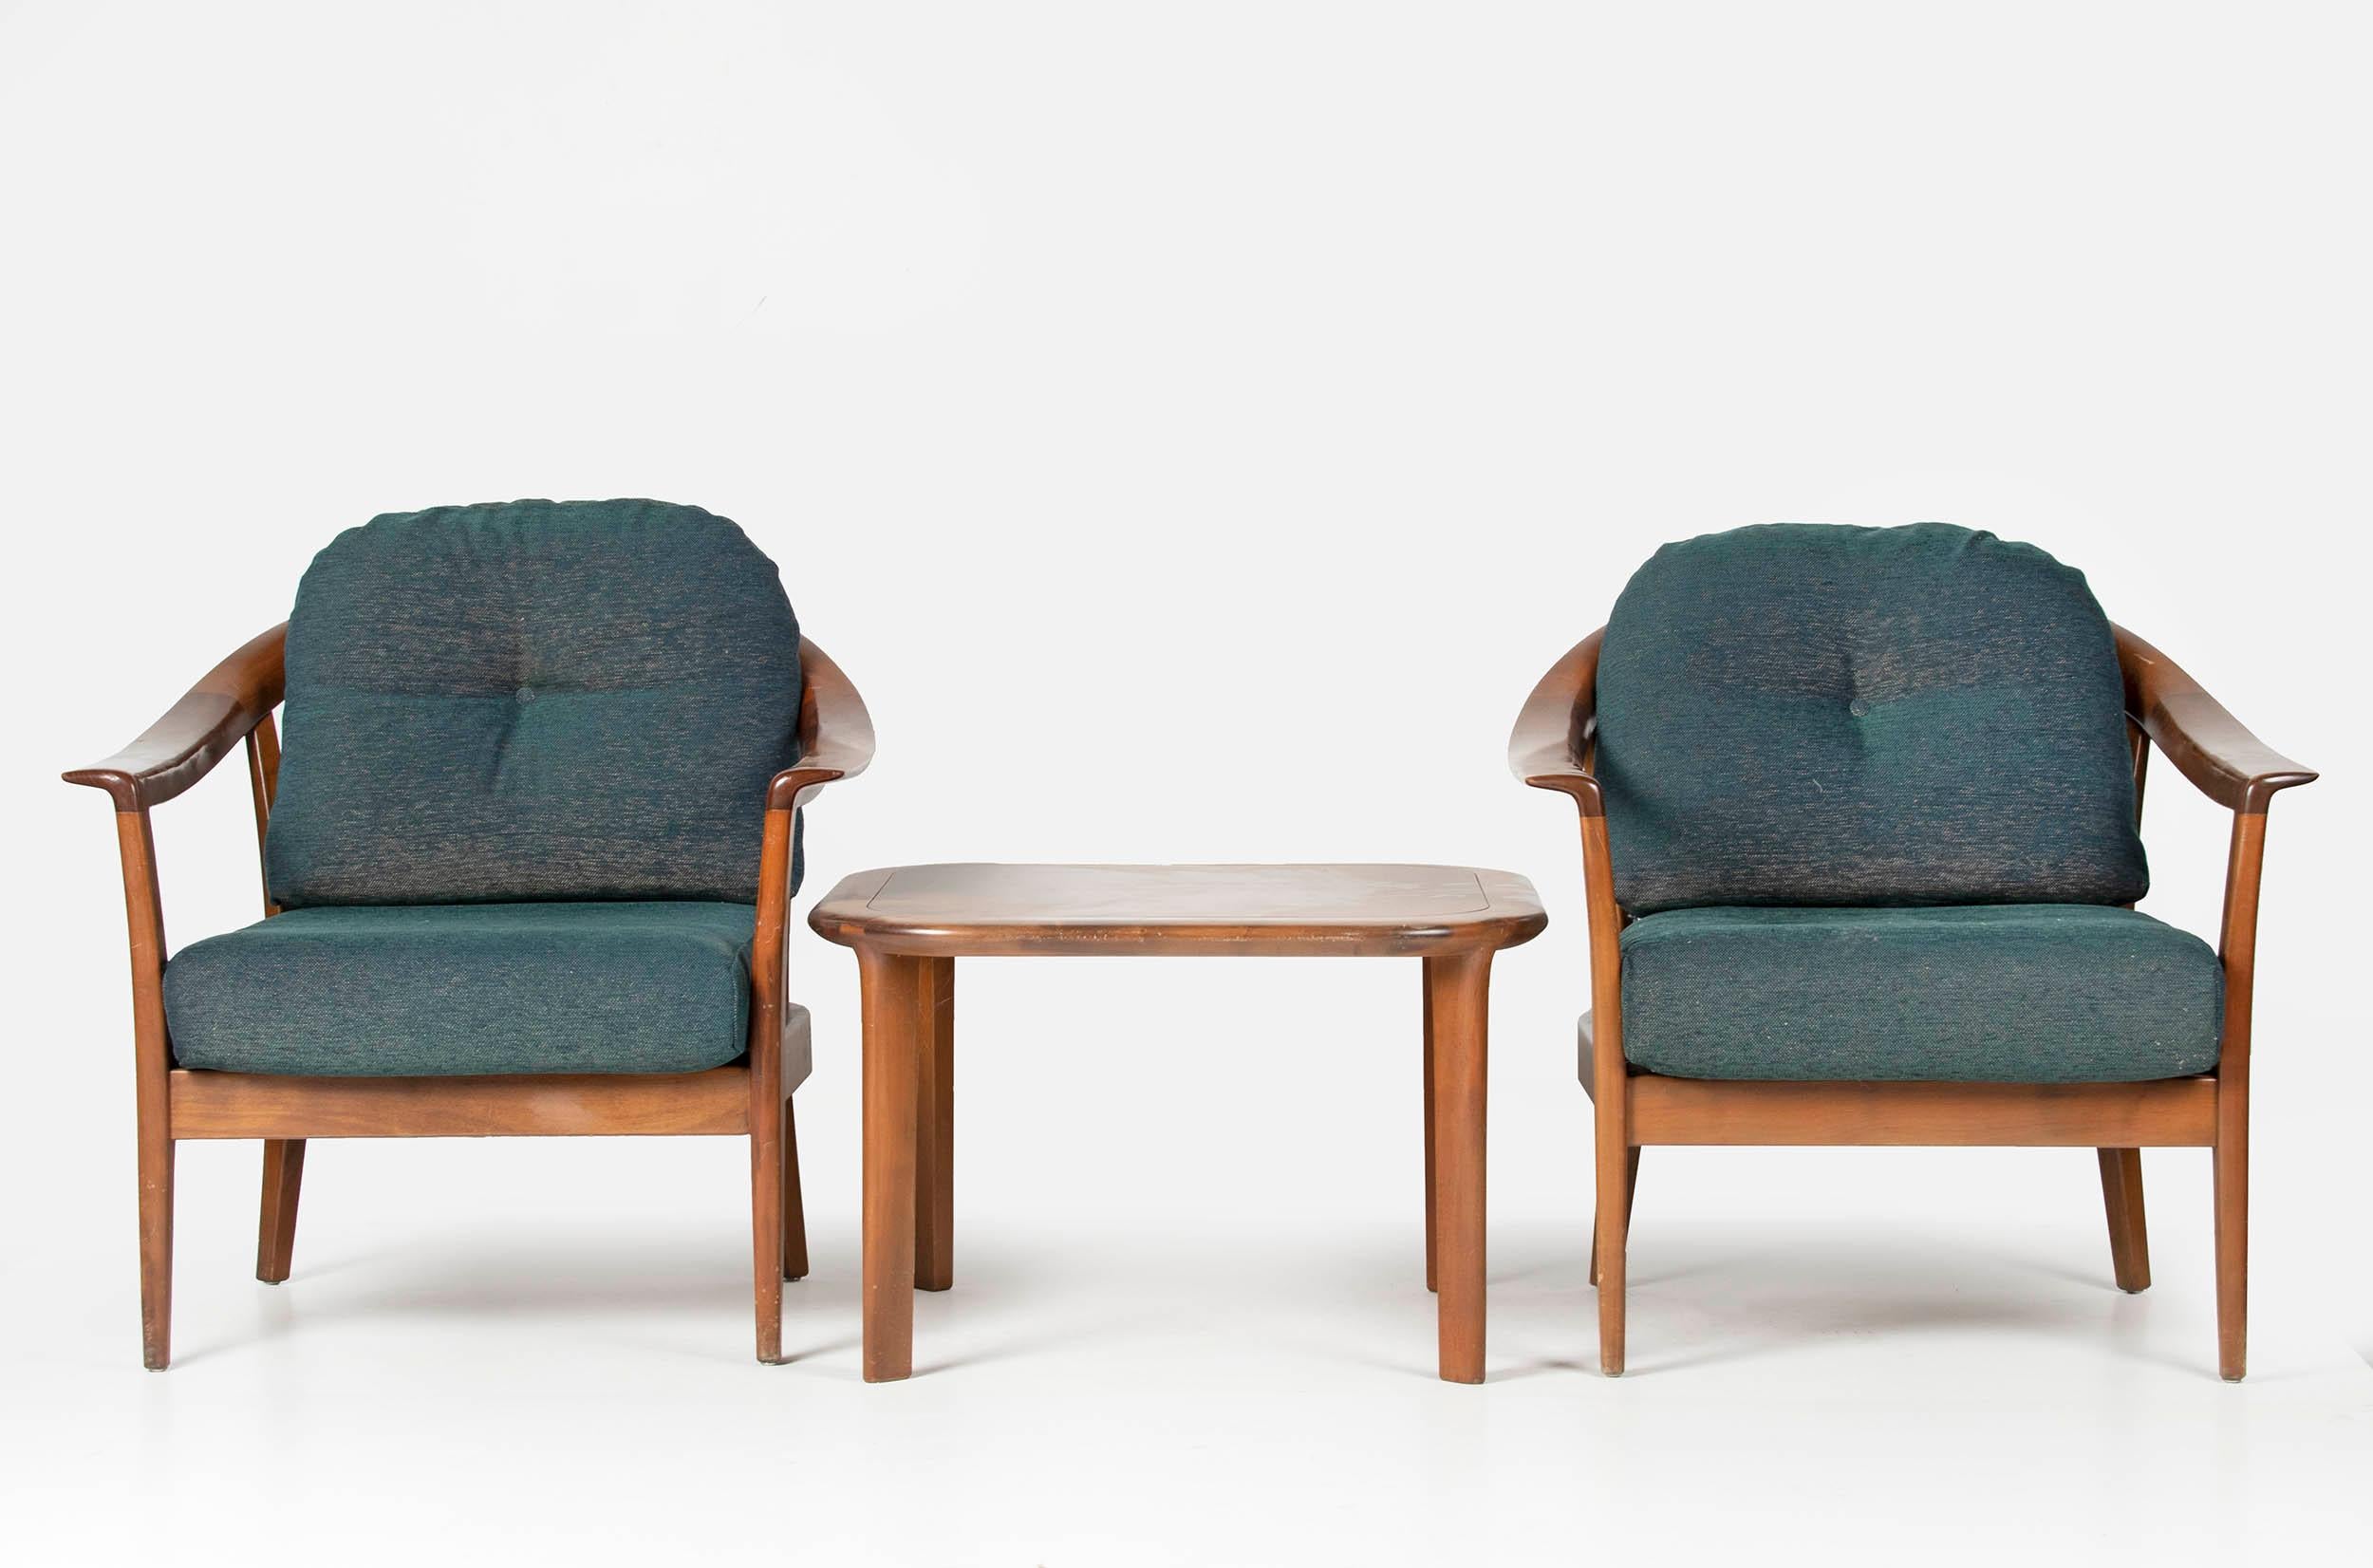 Two easy chairs with a side table from the German brand Wilhelm Knoll. The chairs are made of cherrywood, the wood has a warm, blond-brown color. The cushions have recently been fitted with new upholstery. This is a sturdy dark green, soft mixed